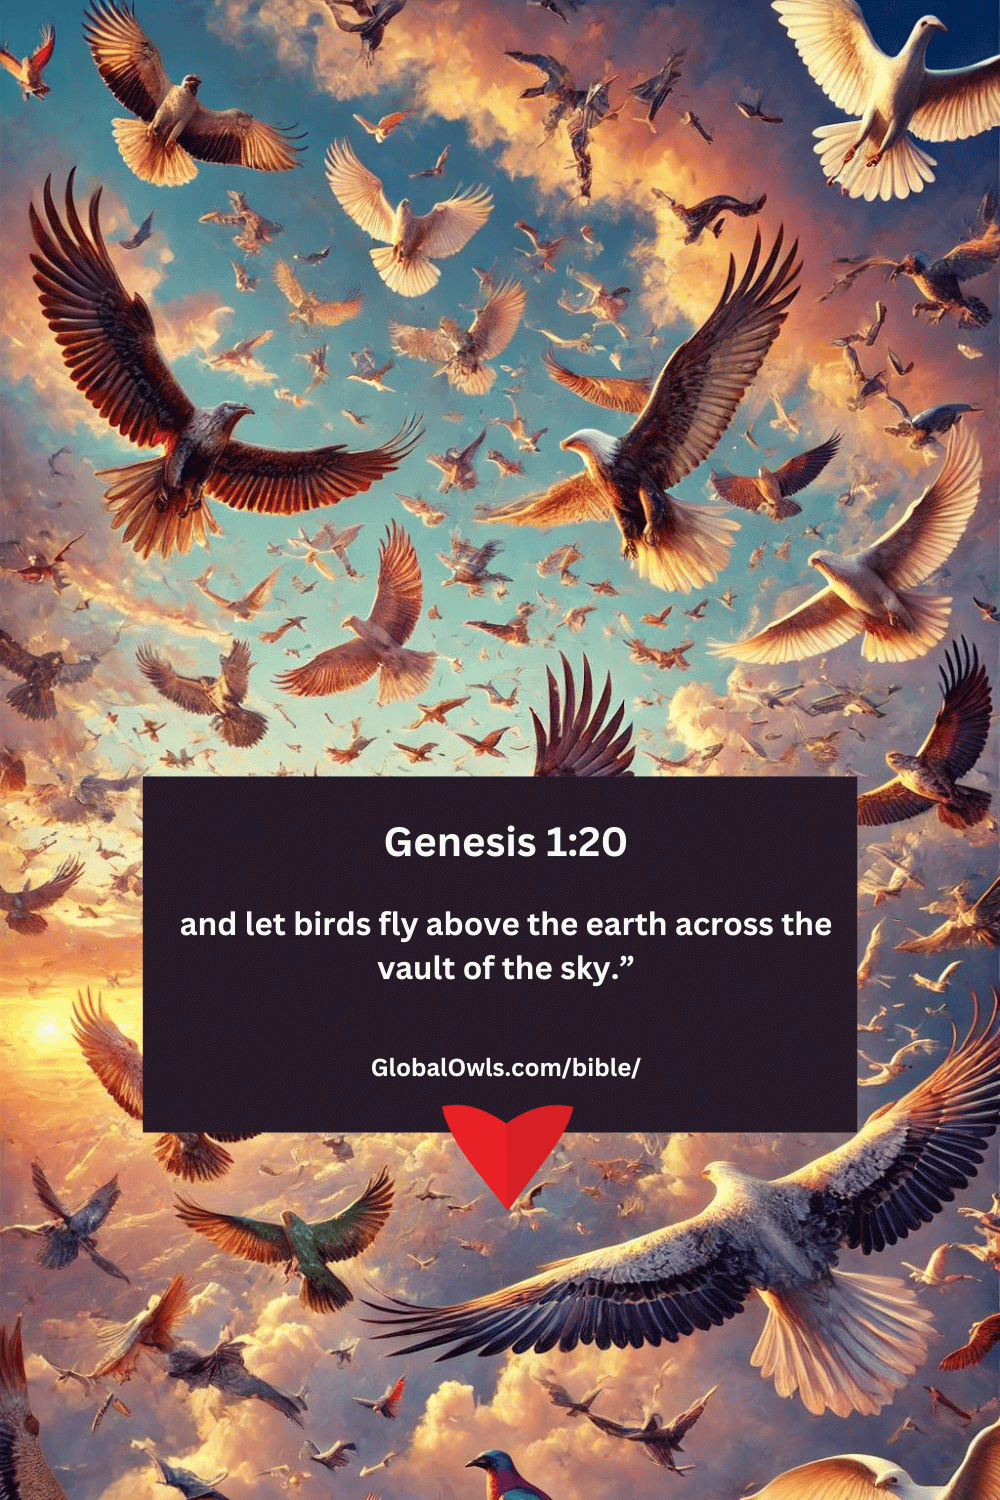 Genesis 1-20 and let birds fly above the earth across the vault of the sky.”